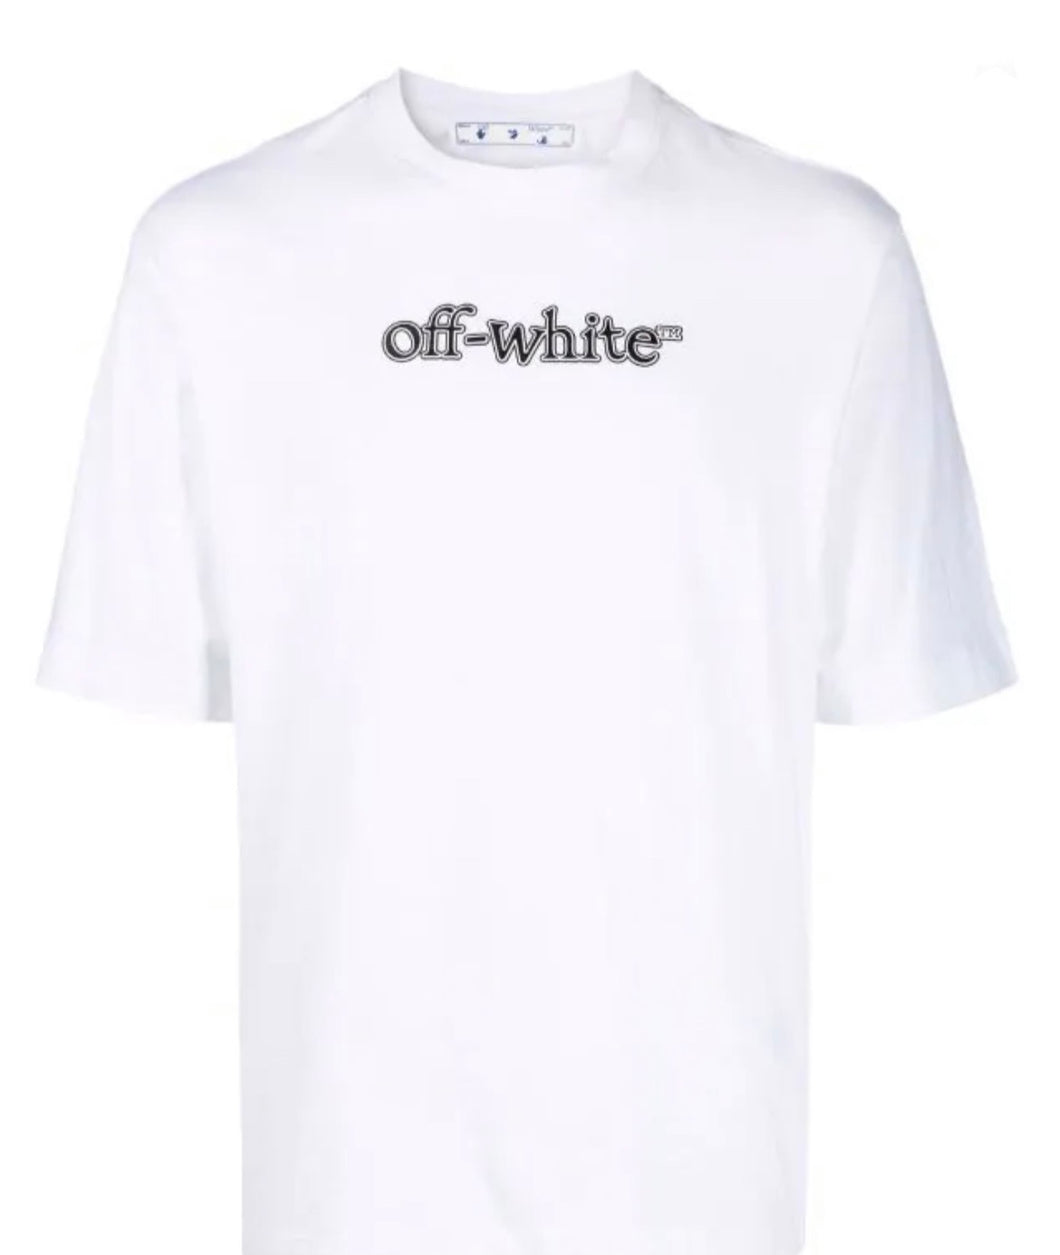 SHIRT OFF-WHITE NEW COLLECTION21-22